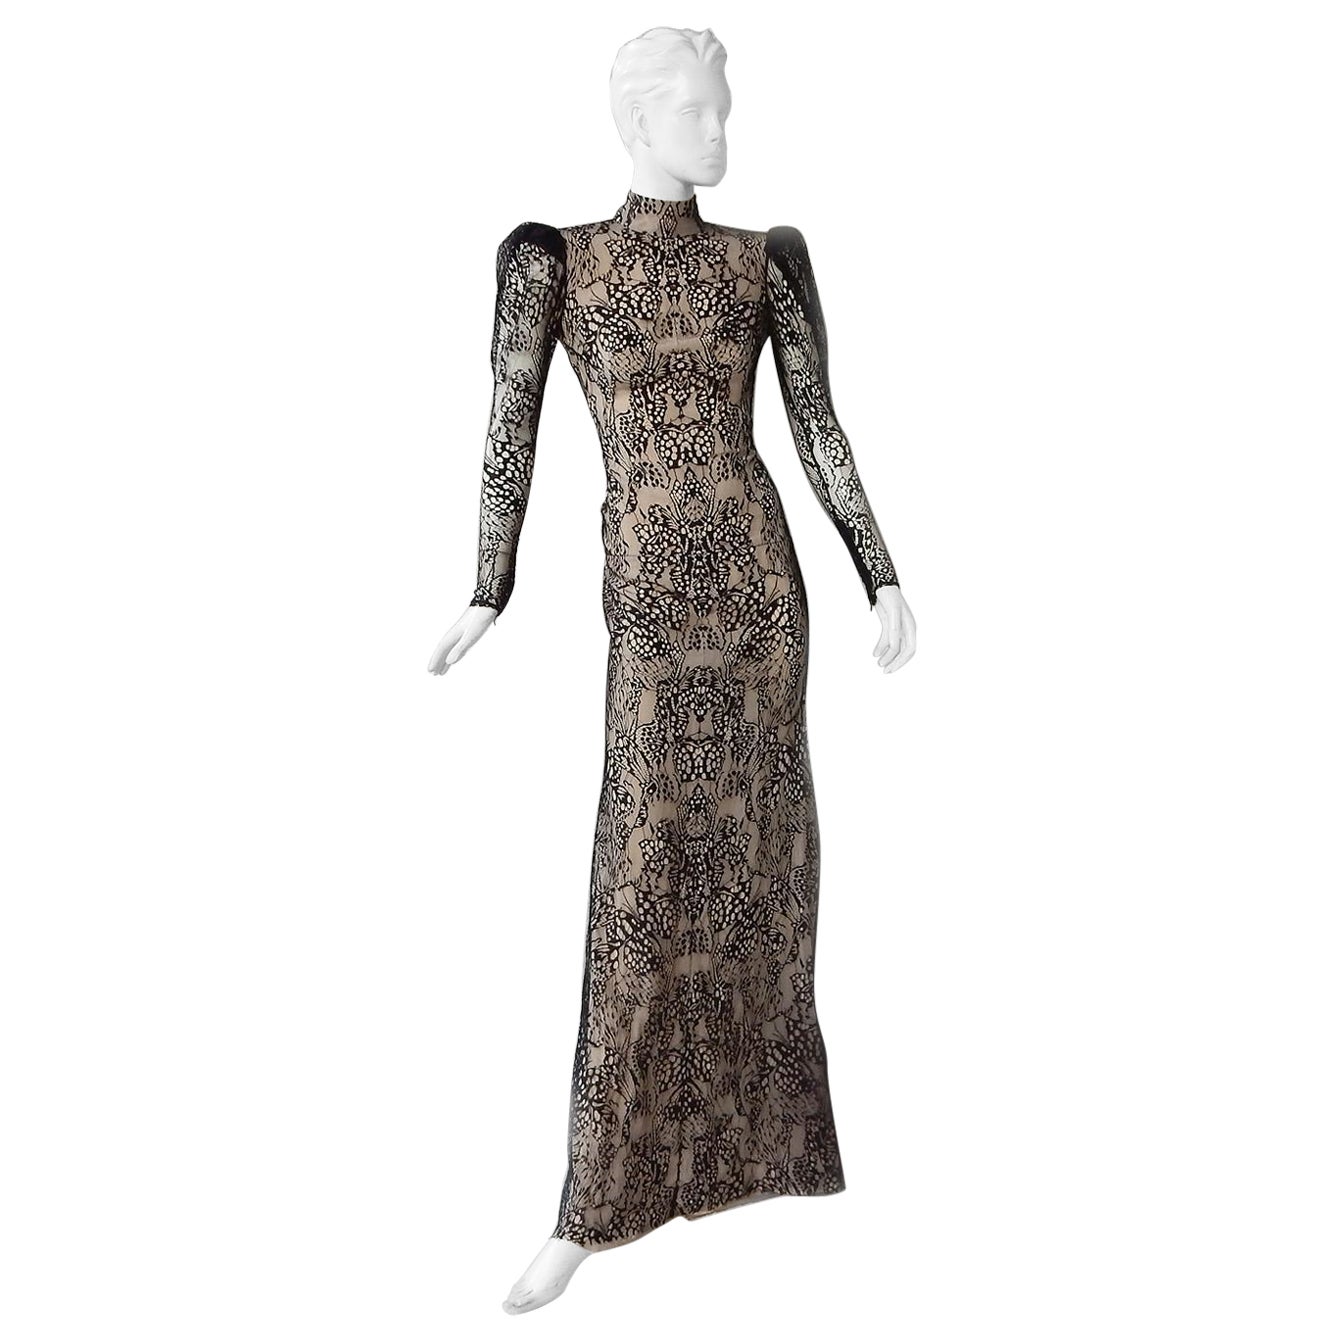 Alexander McQueen Black Lace Butterfly Dress Gown For Sale